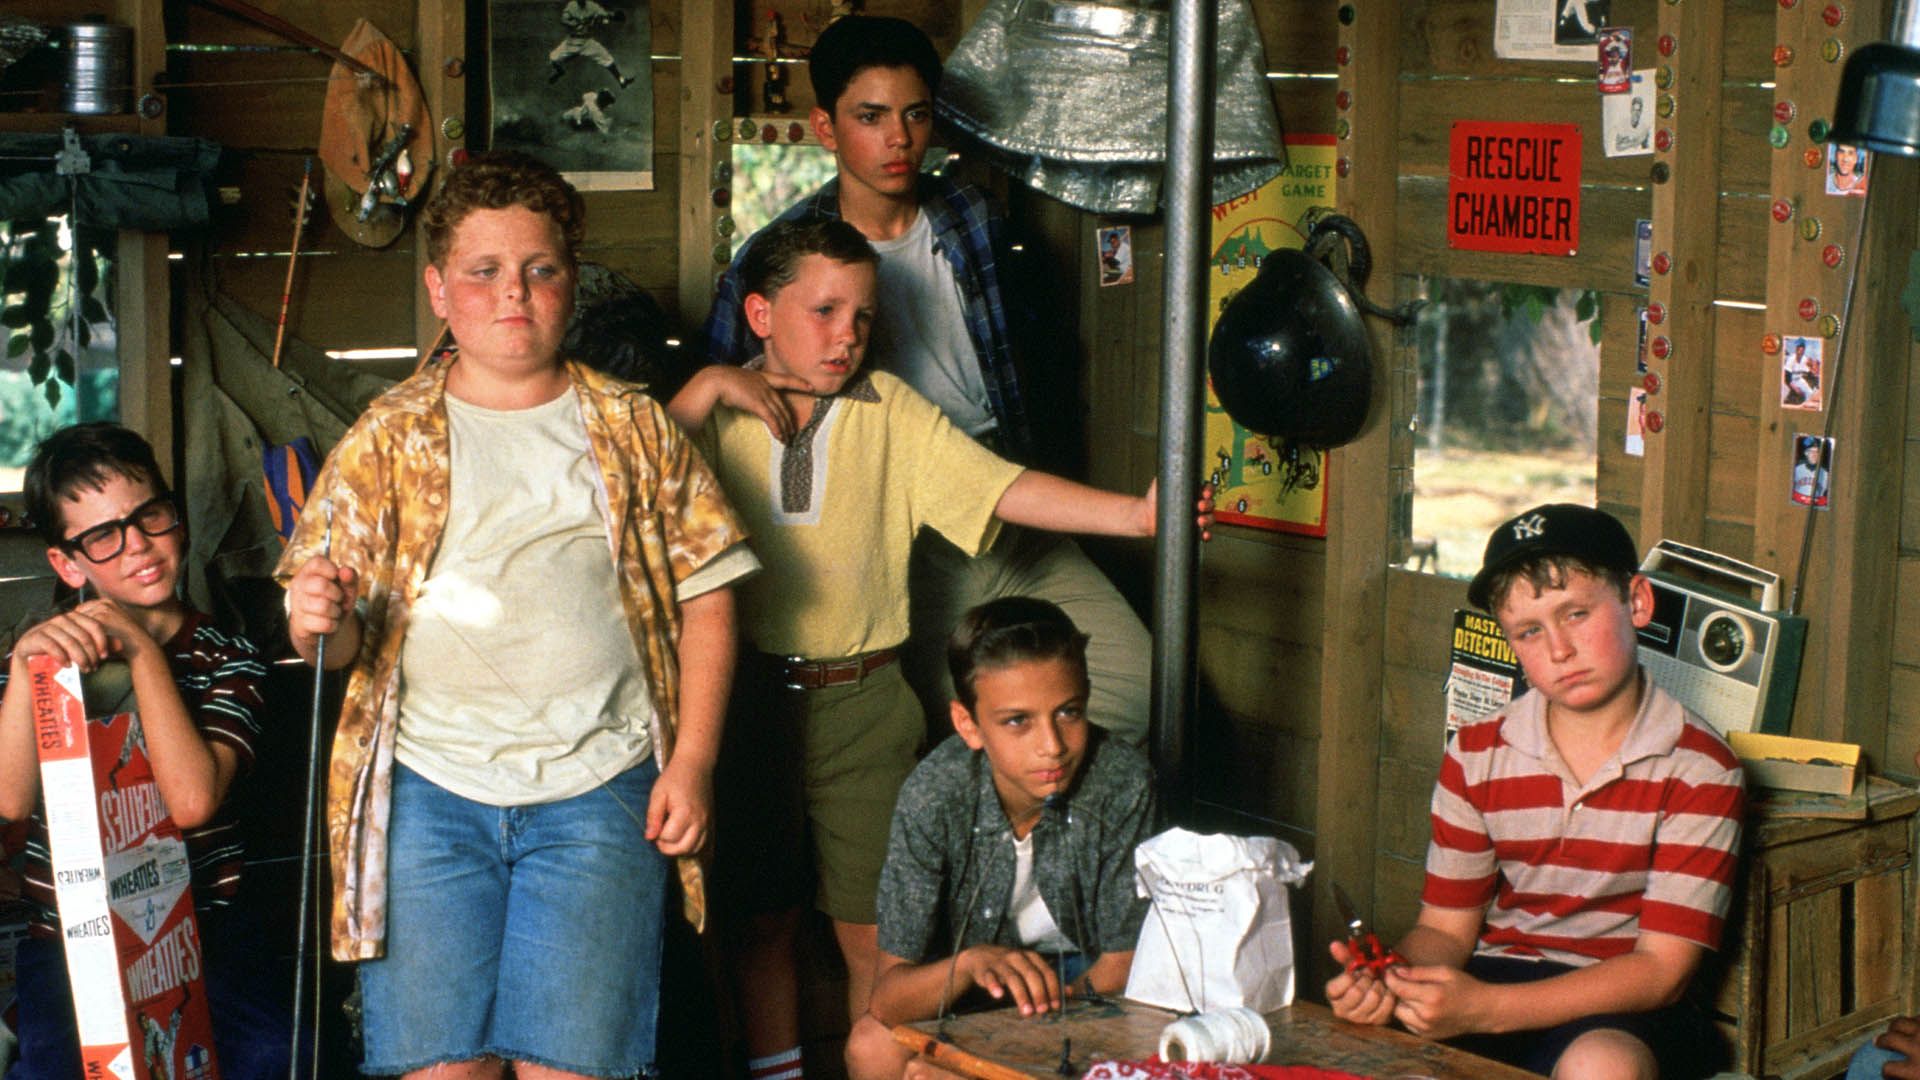 The main characters of the movie The Sandlot